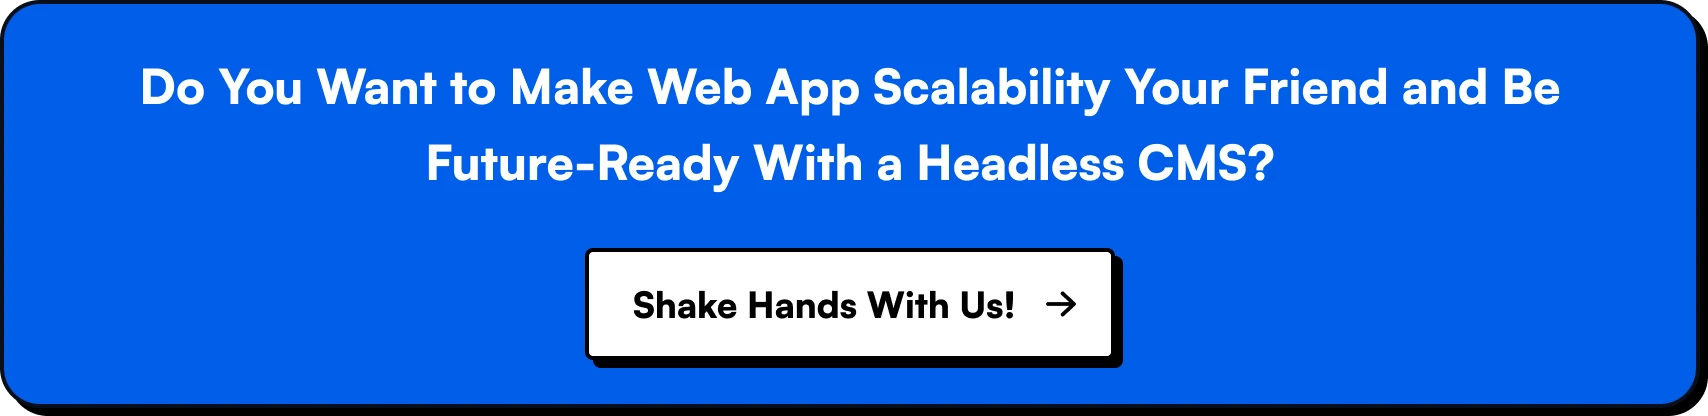 Do You Want to Make Web App Scalability Your Friend and Be Future-Ready With a Headless CMS